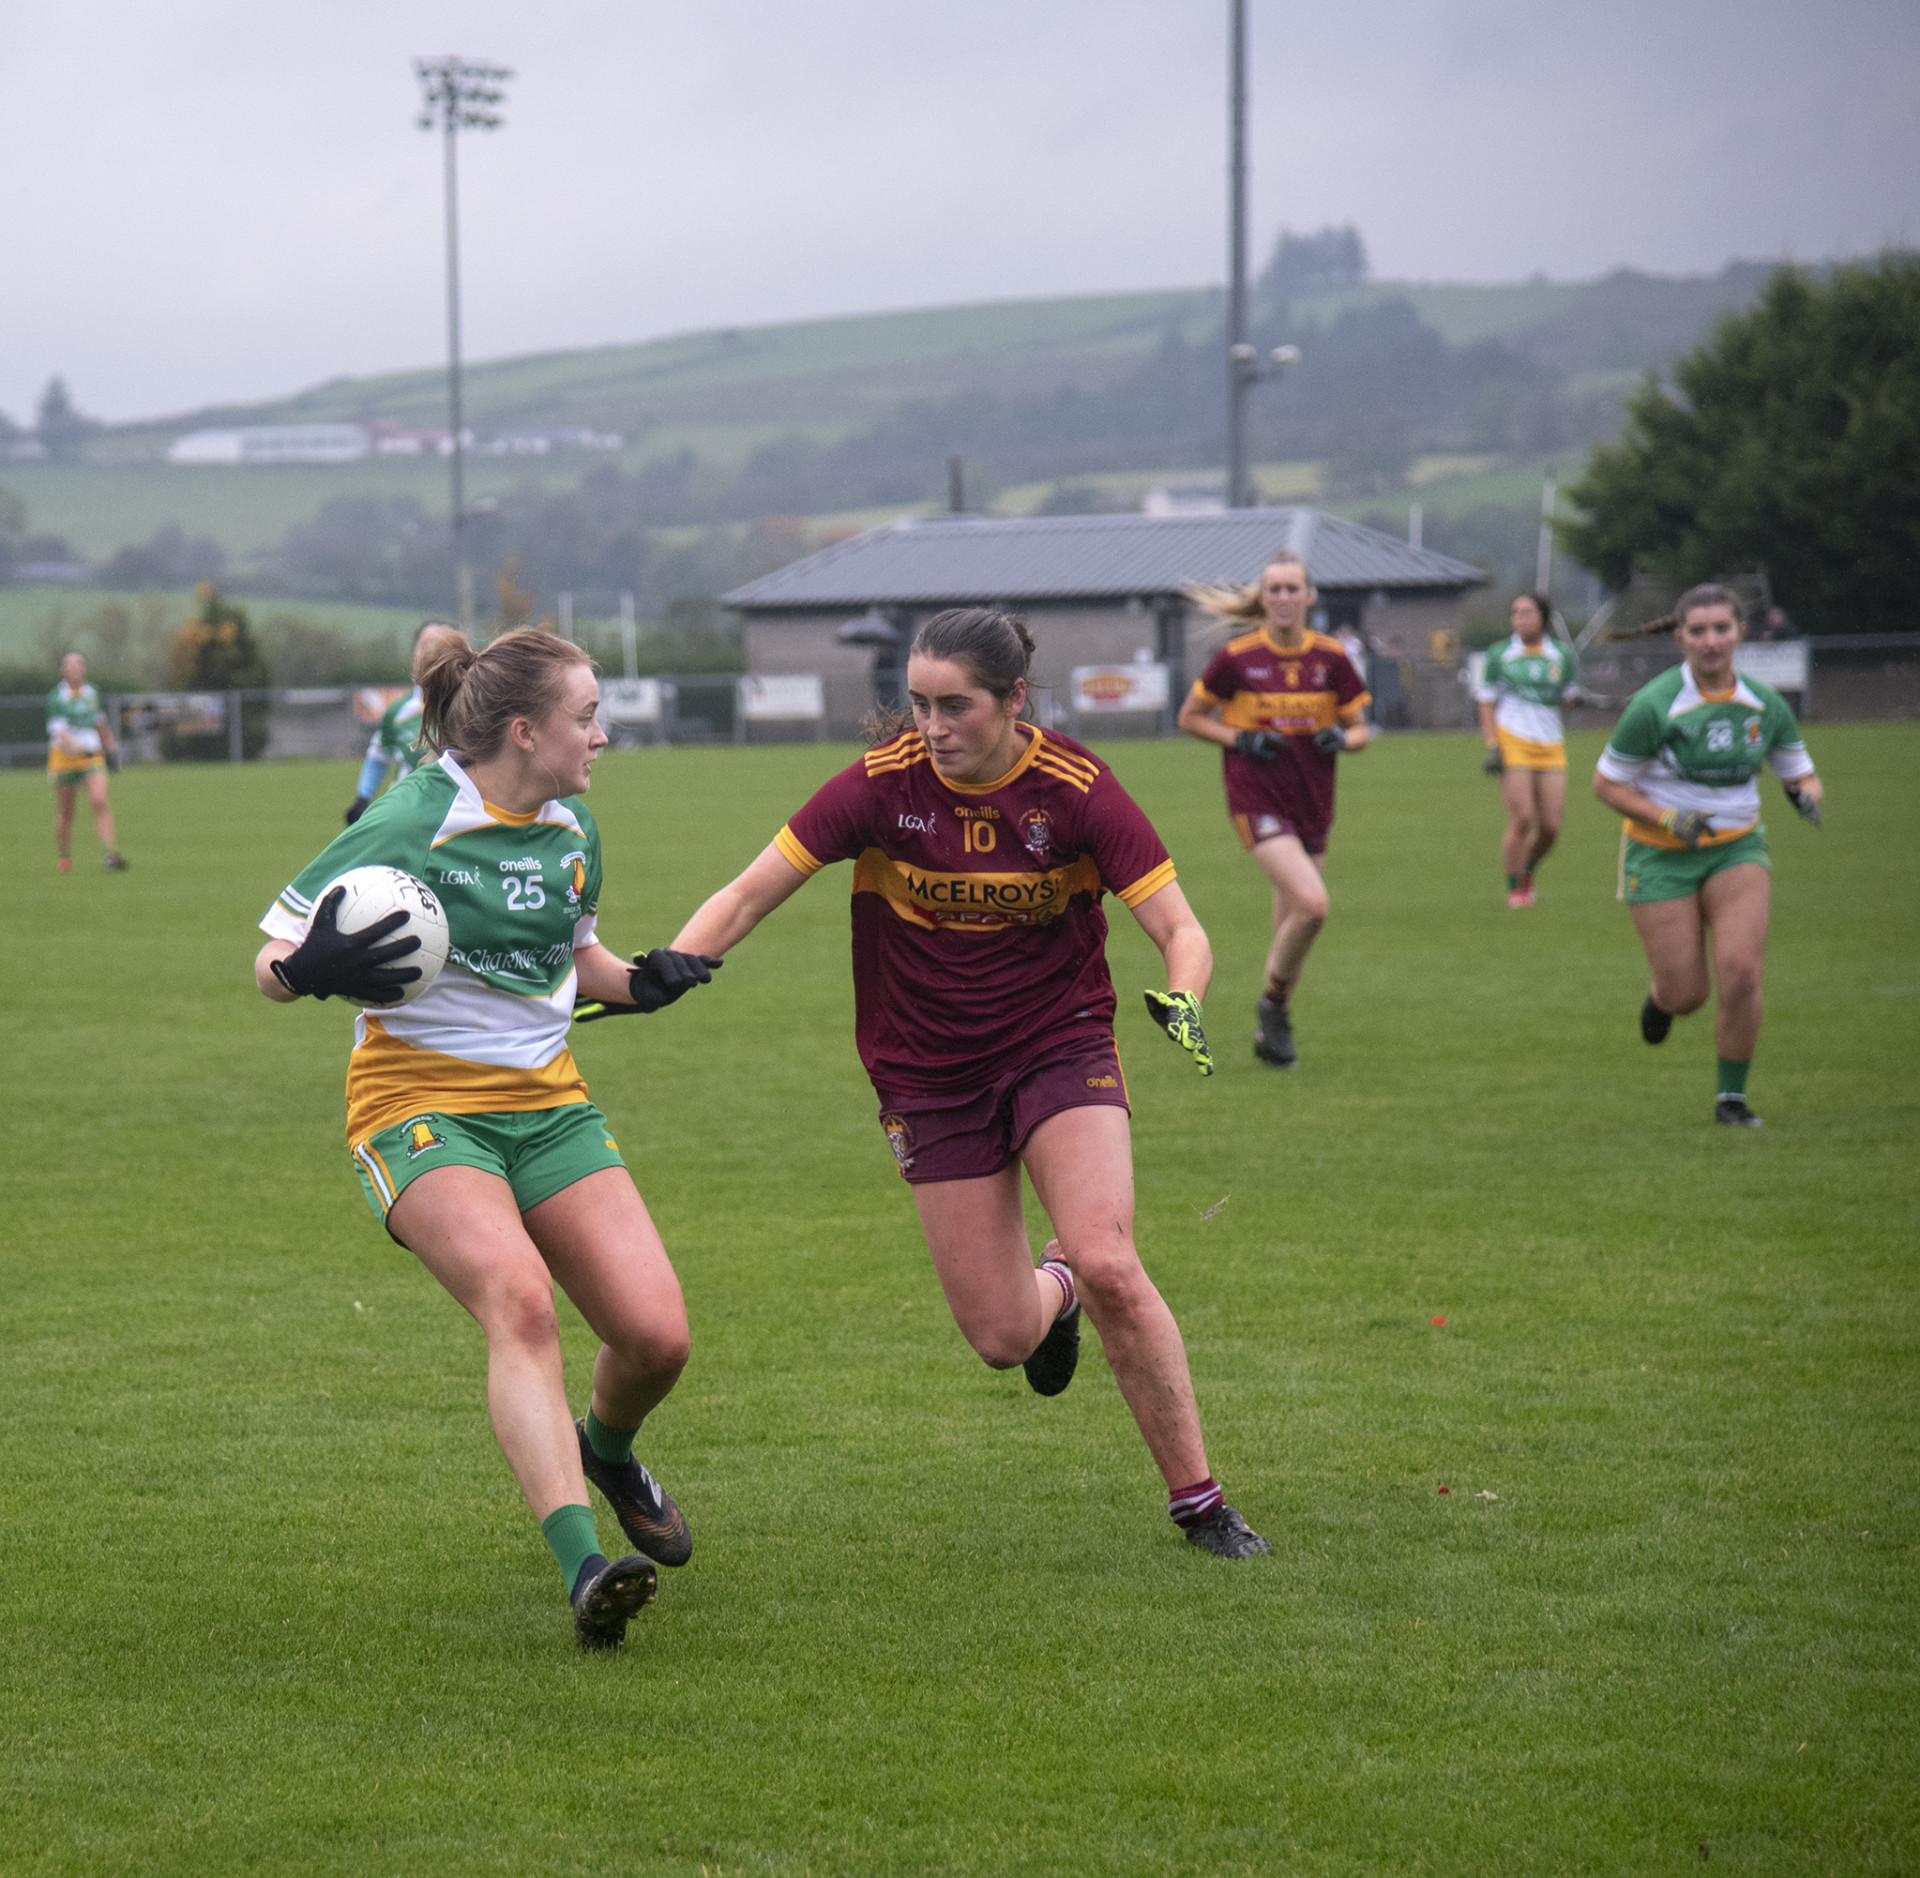 Busy weekend of Ladies Championship action ahead